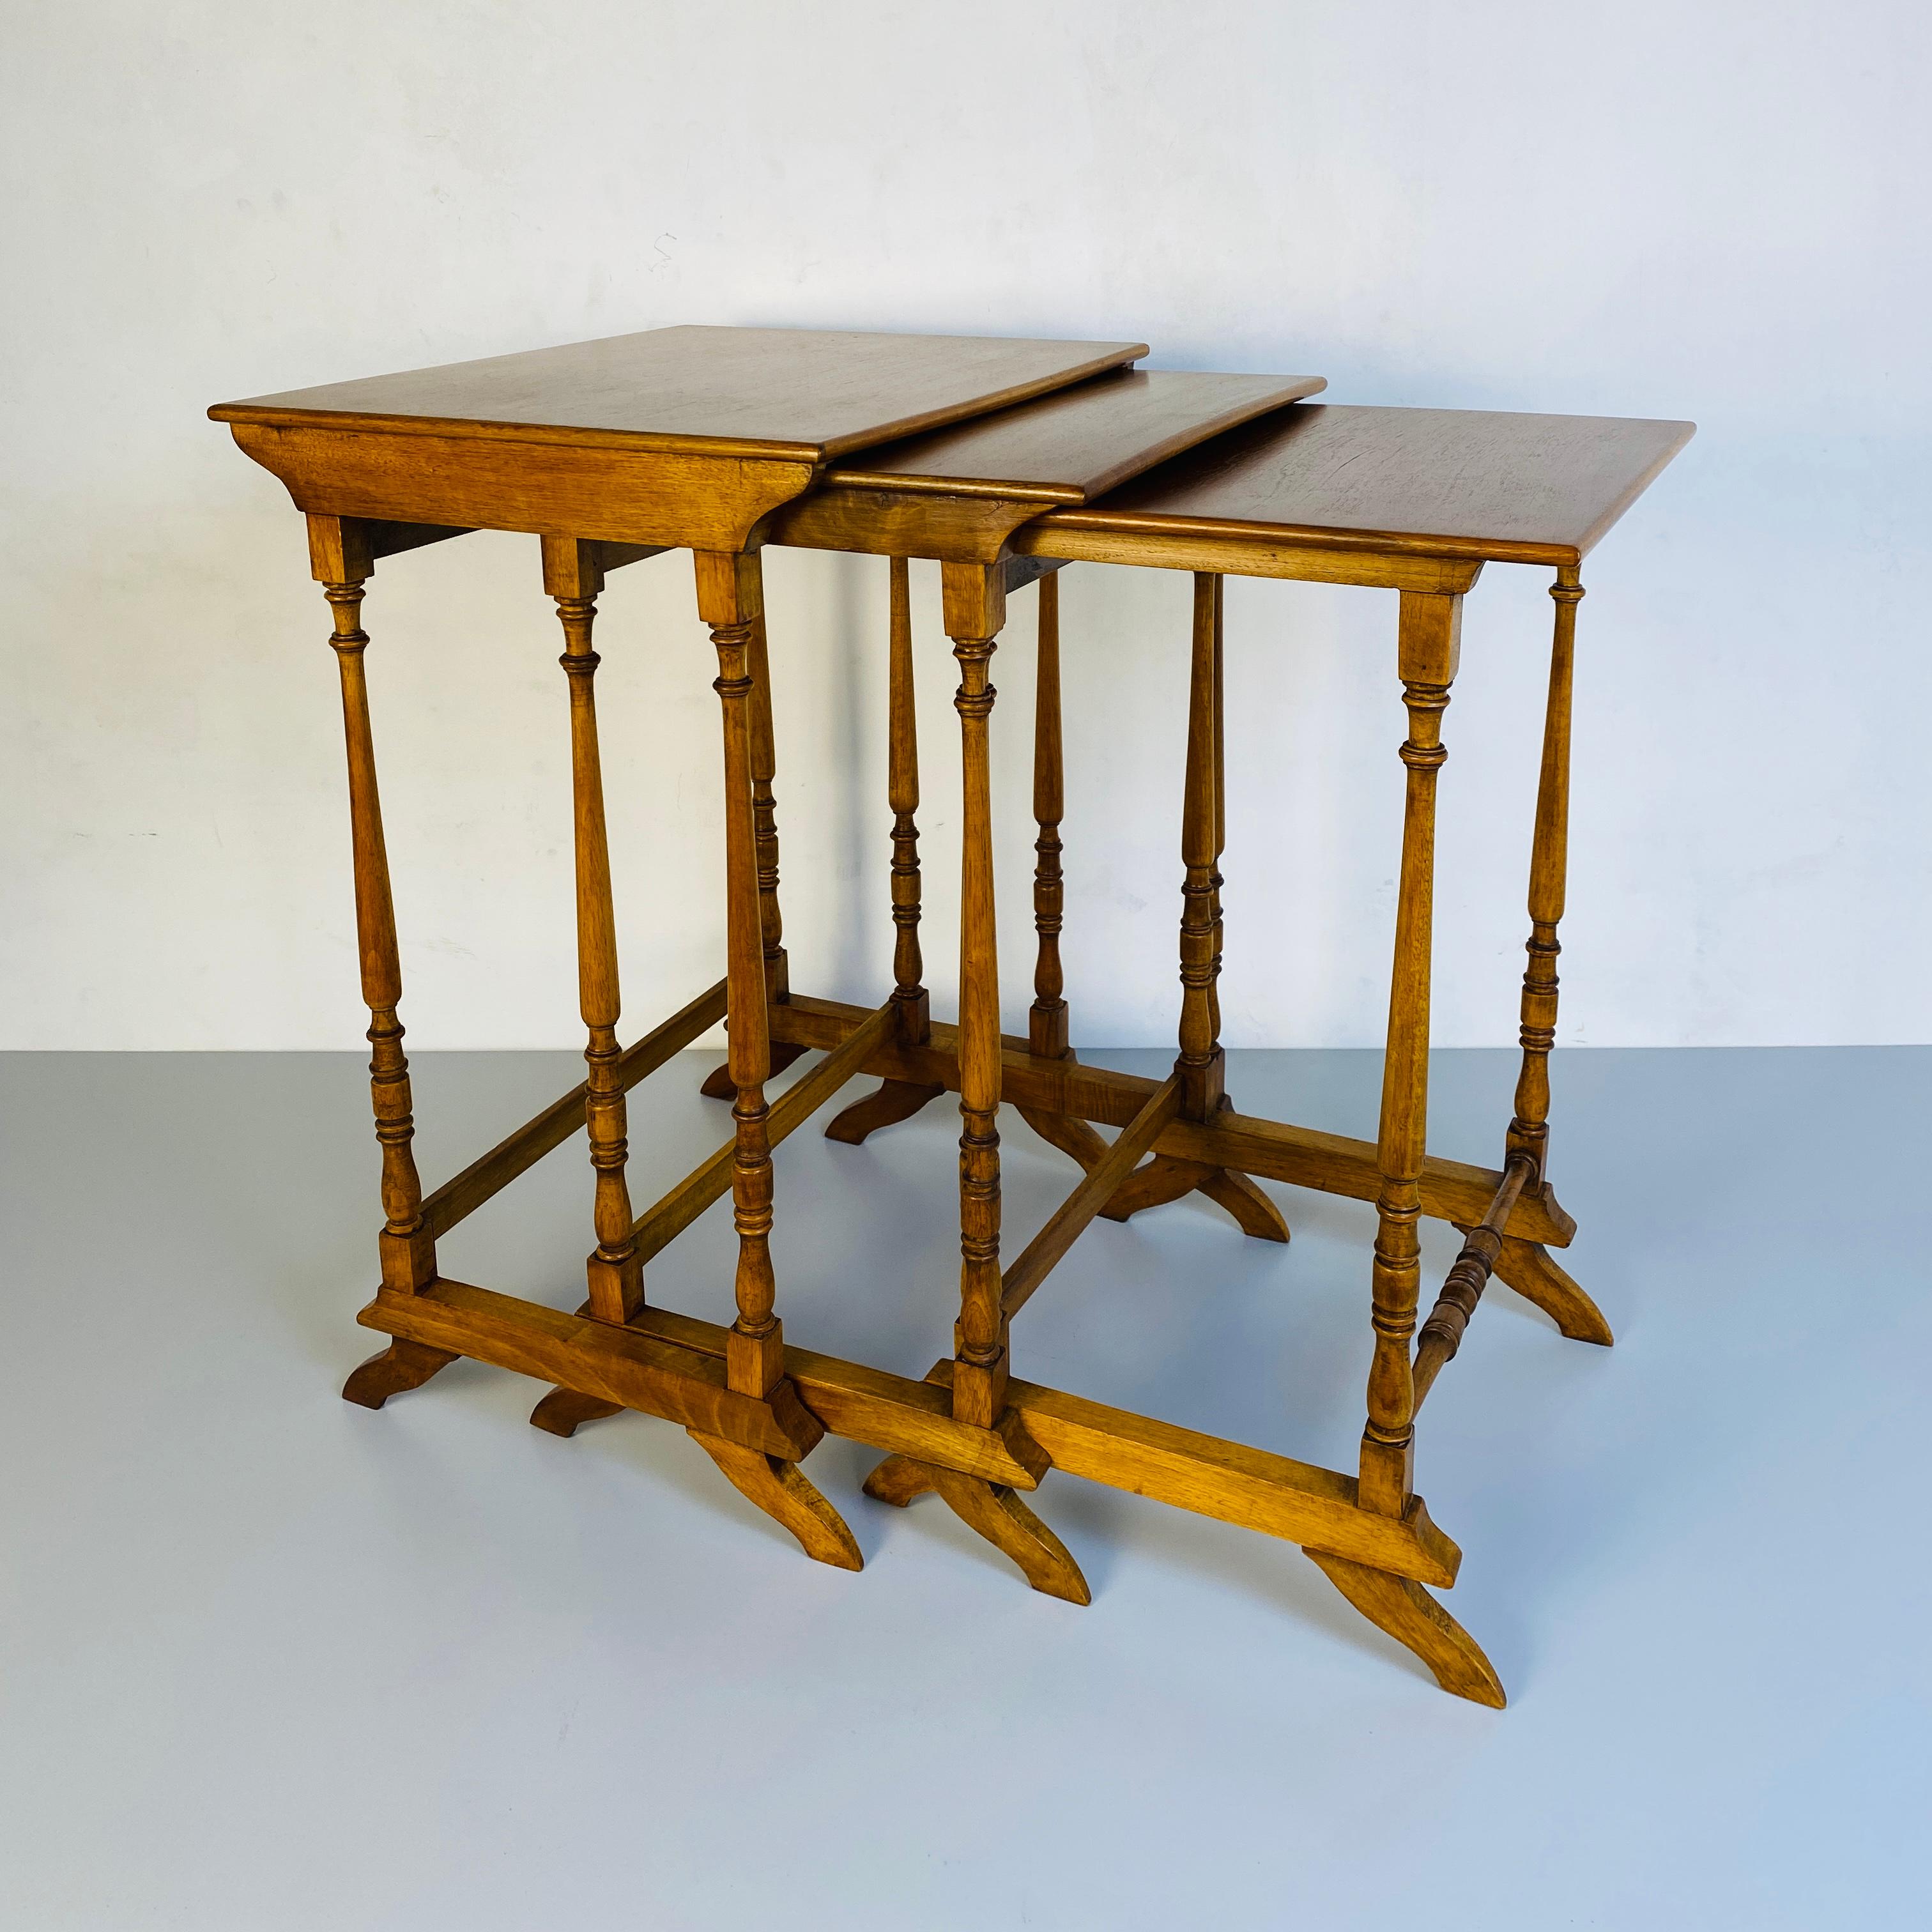 Italian set of three rectangular light wood tables with shapely legs, 1900s
Set of three rectangular tables in light wood with shapely legs, which can be inserted one inside the other.

Fully restored, no defects.

Measurements
Large 35 x 46 x